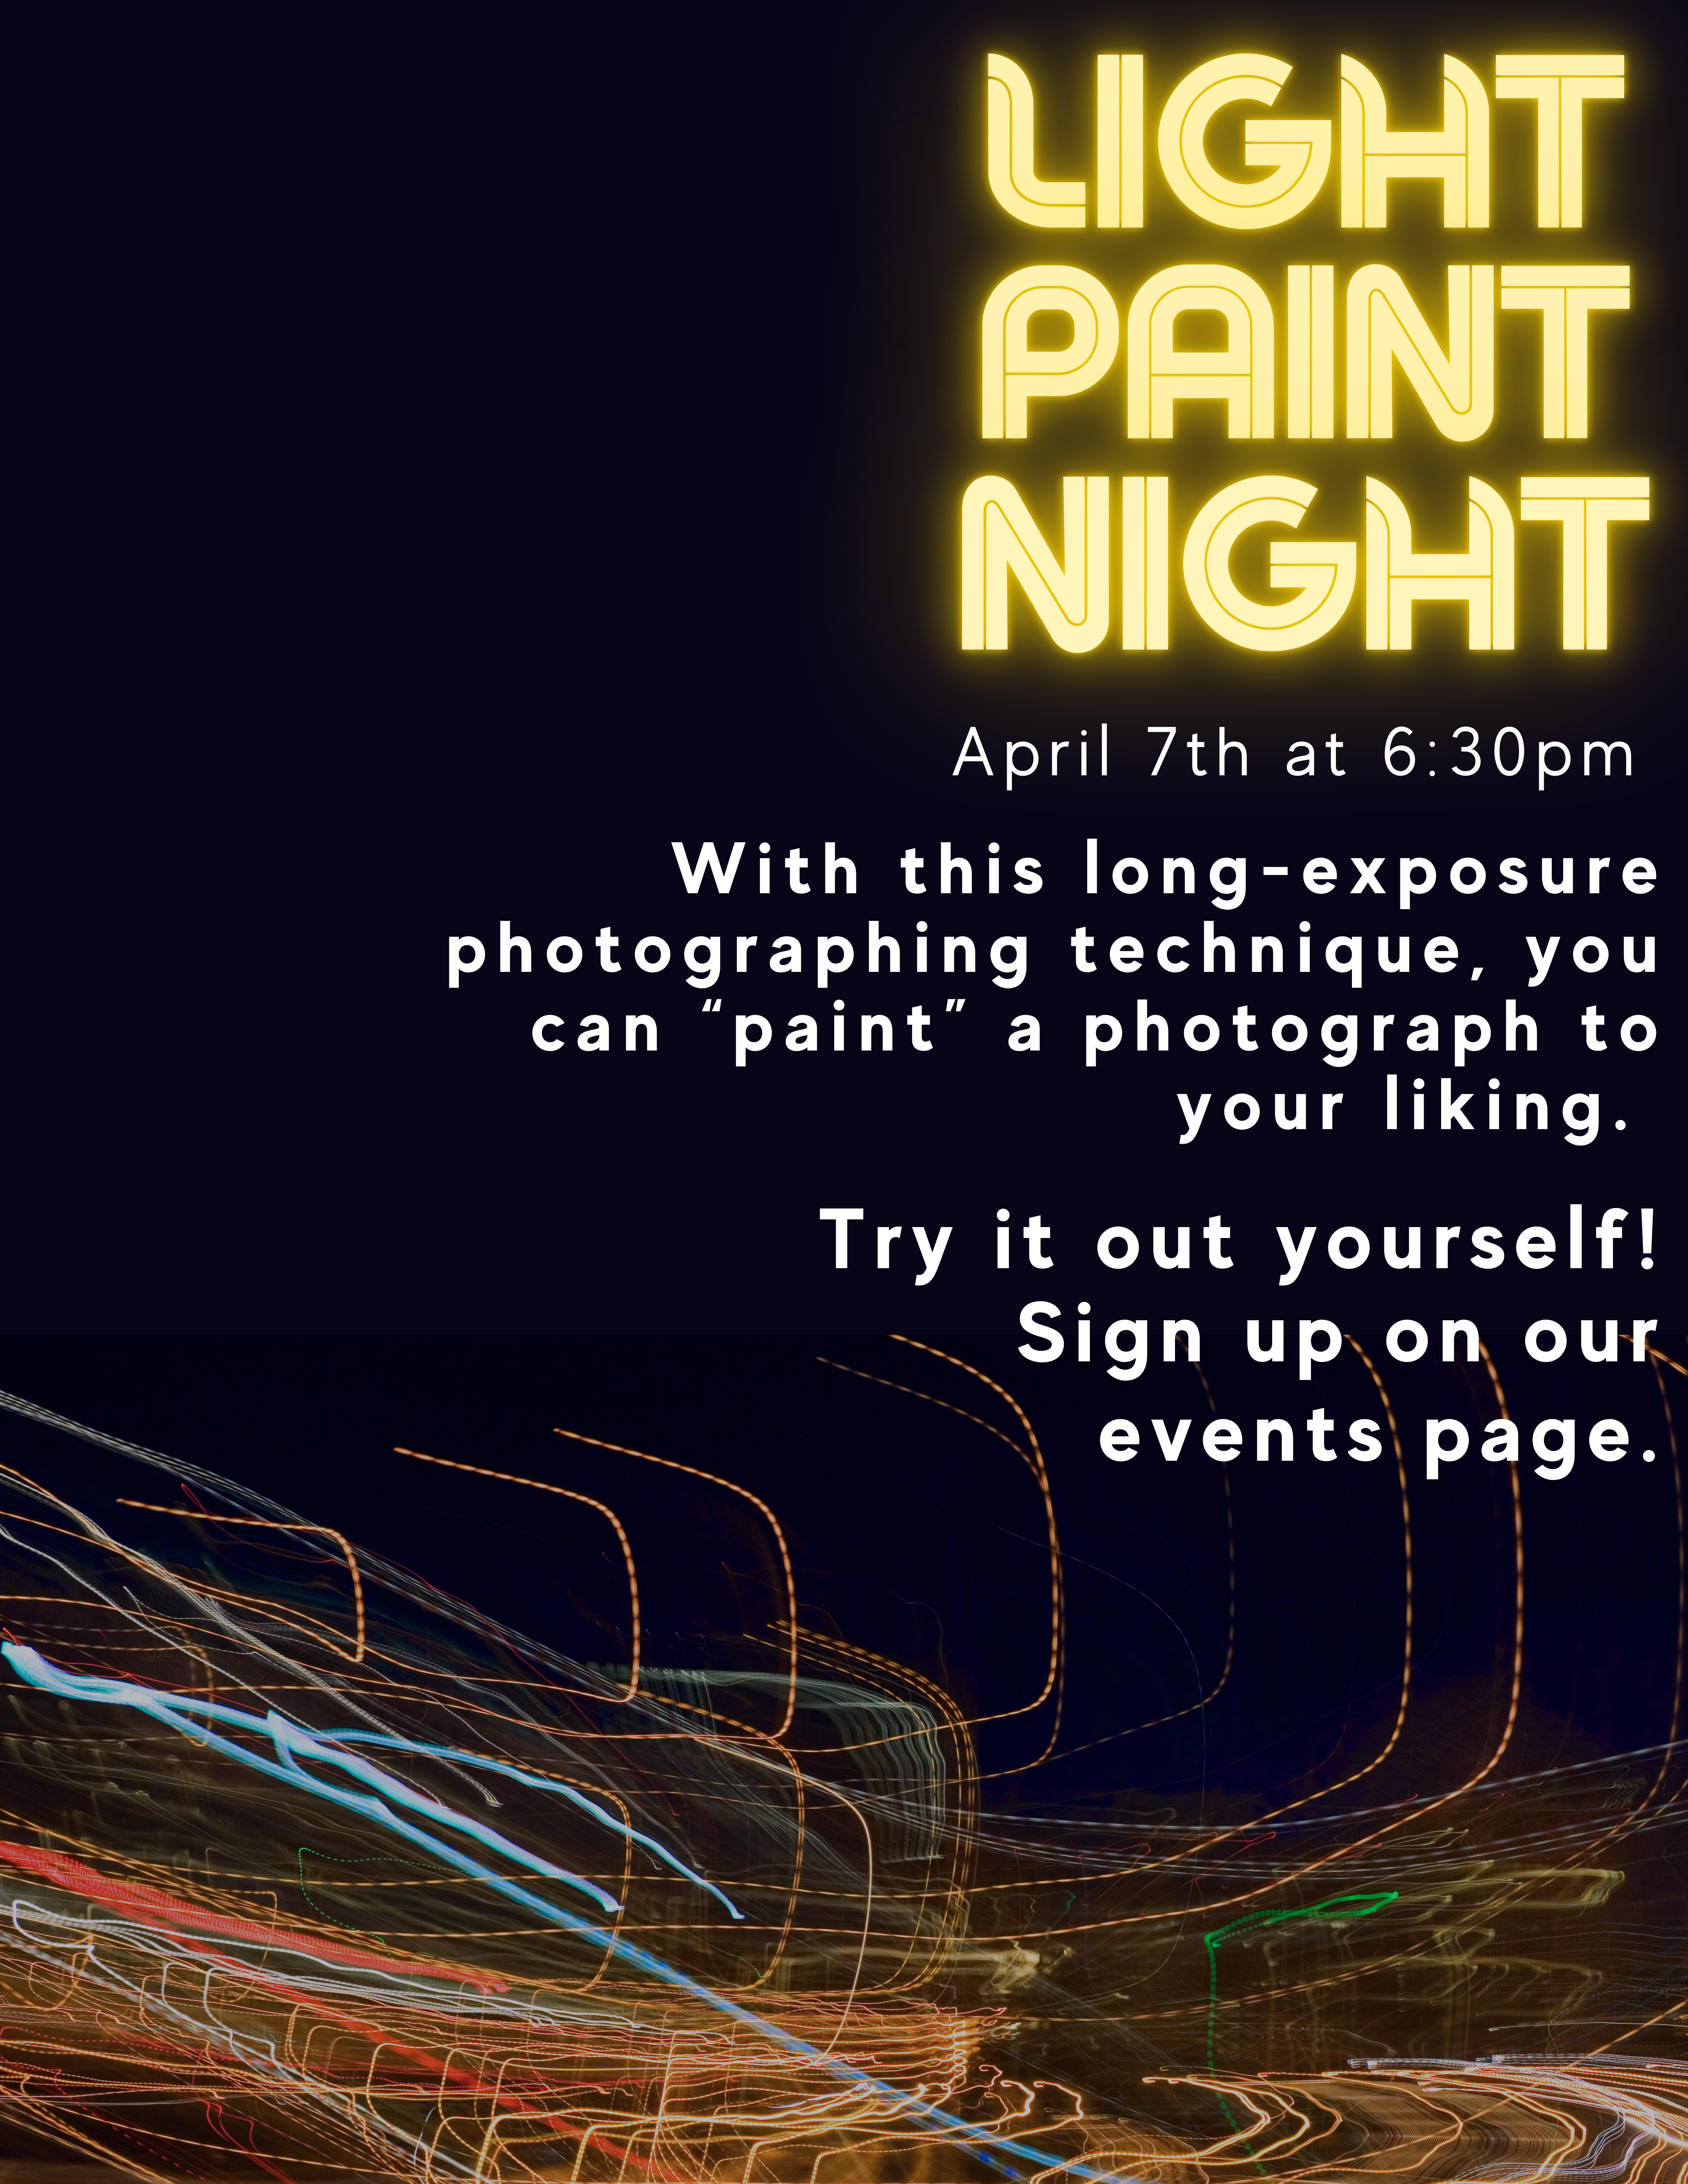 Image of a black background with trails of neon light underneath. Text reads: Light Paint Night. April 7th at 6:30pm. With this long-exposure photographing technique, you can “paint” a photograph to your liking. Try it out yourself! Sign up on our events page."